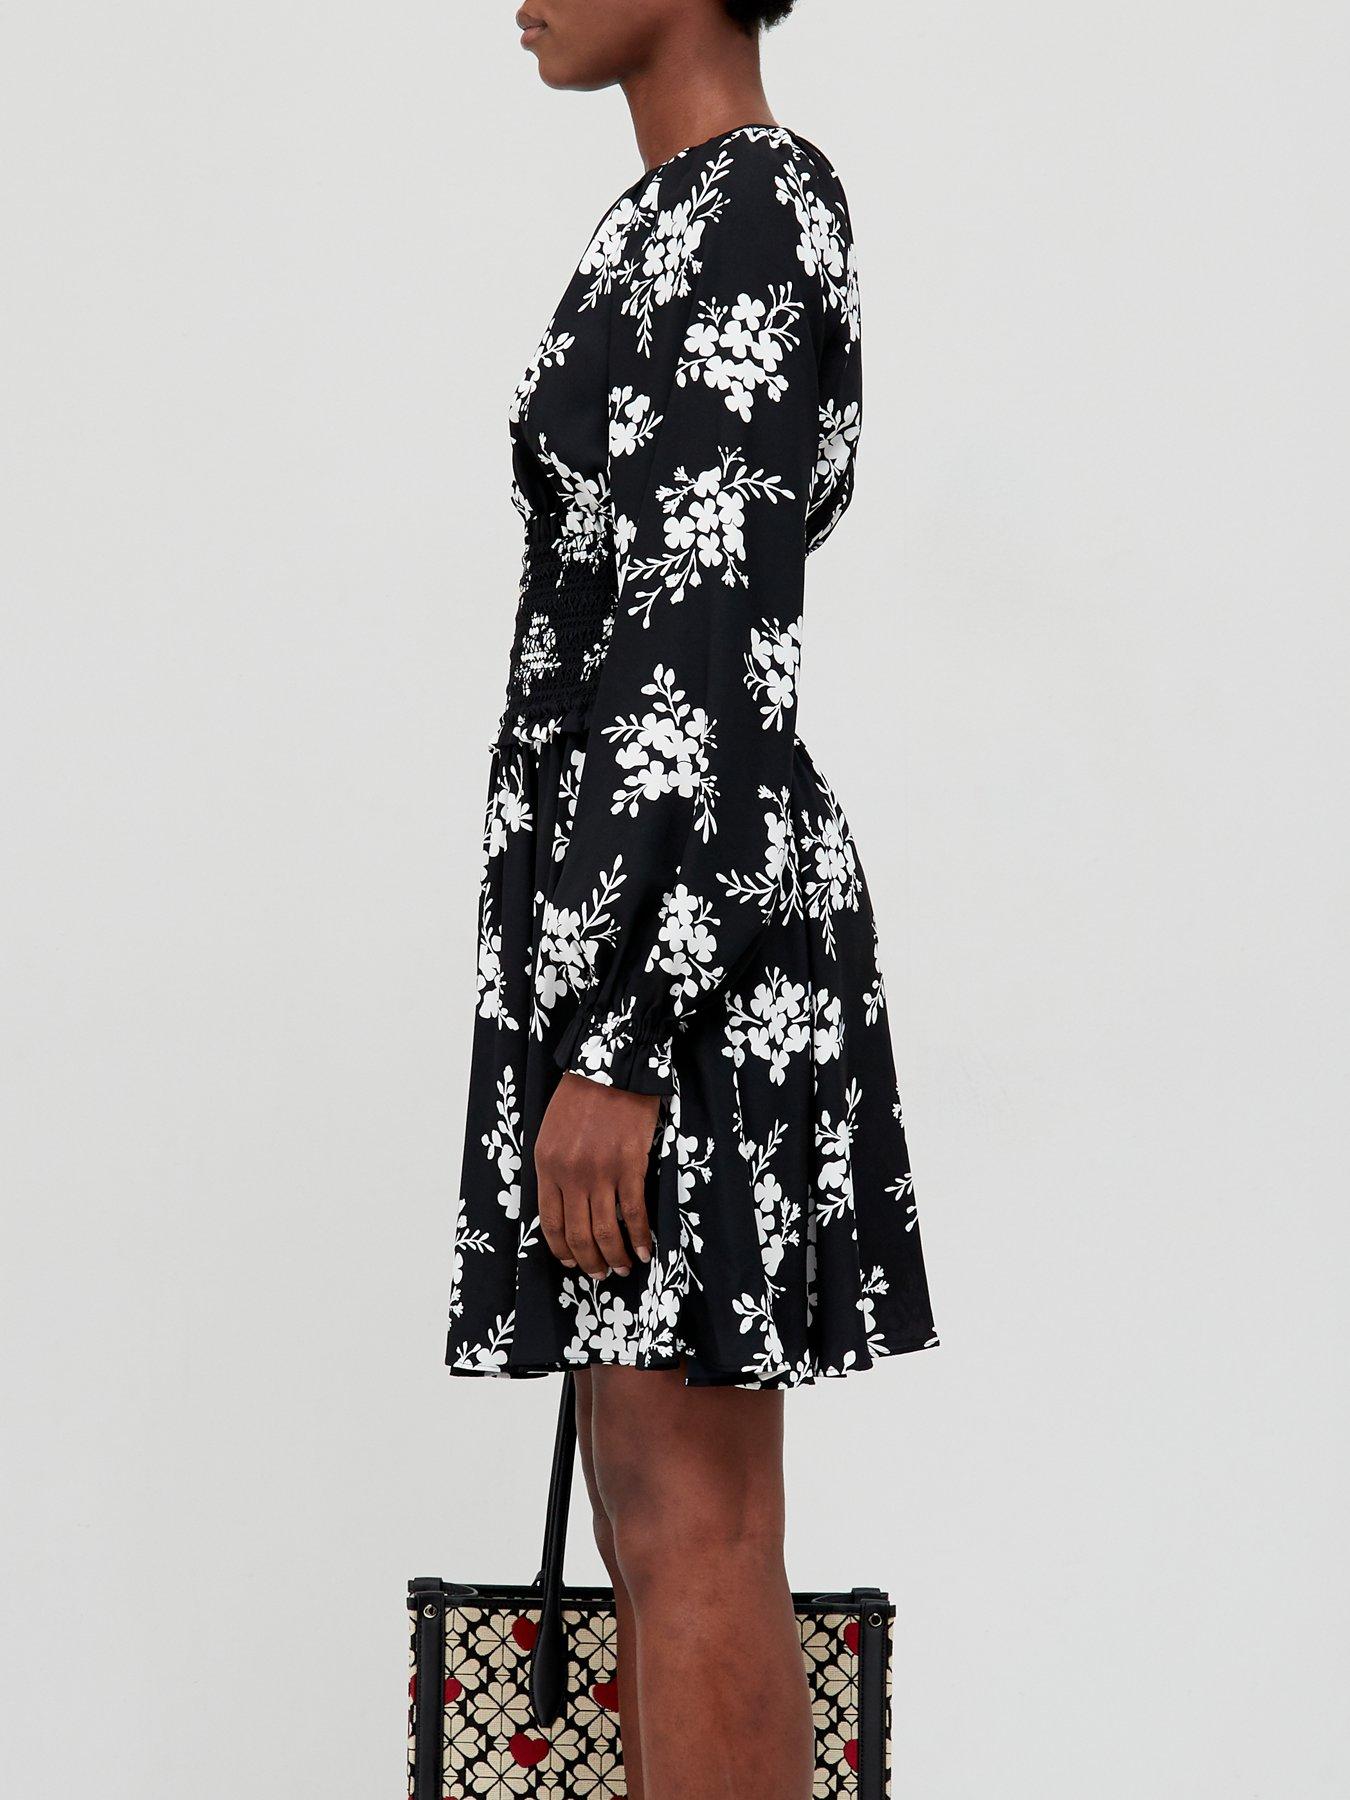 Kate Spade New York Floral Clusters Spin Dress - Black/White 